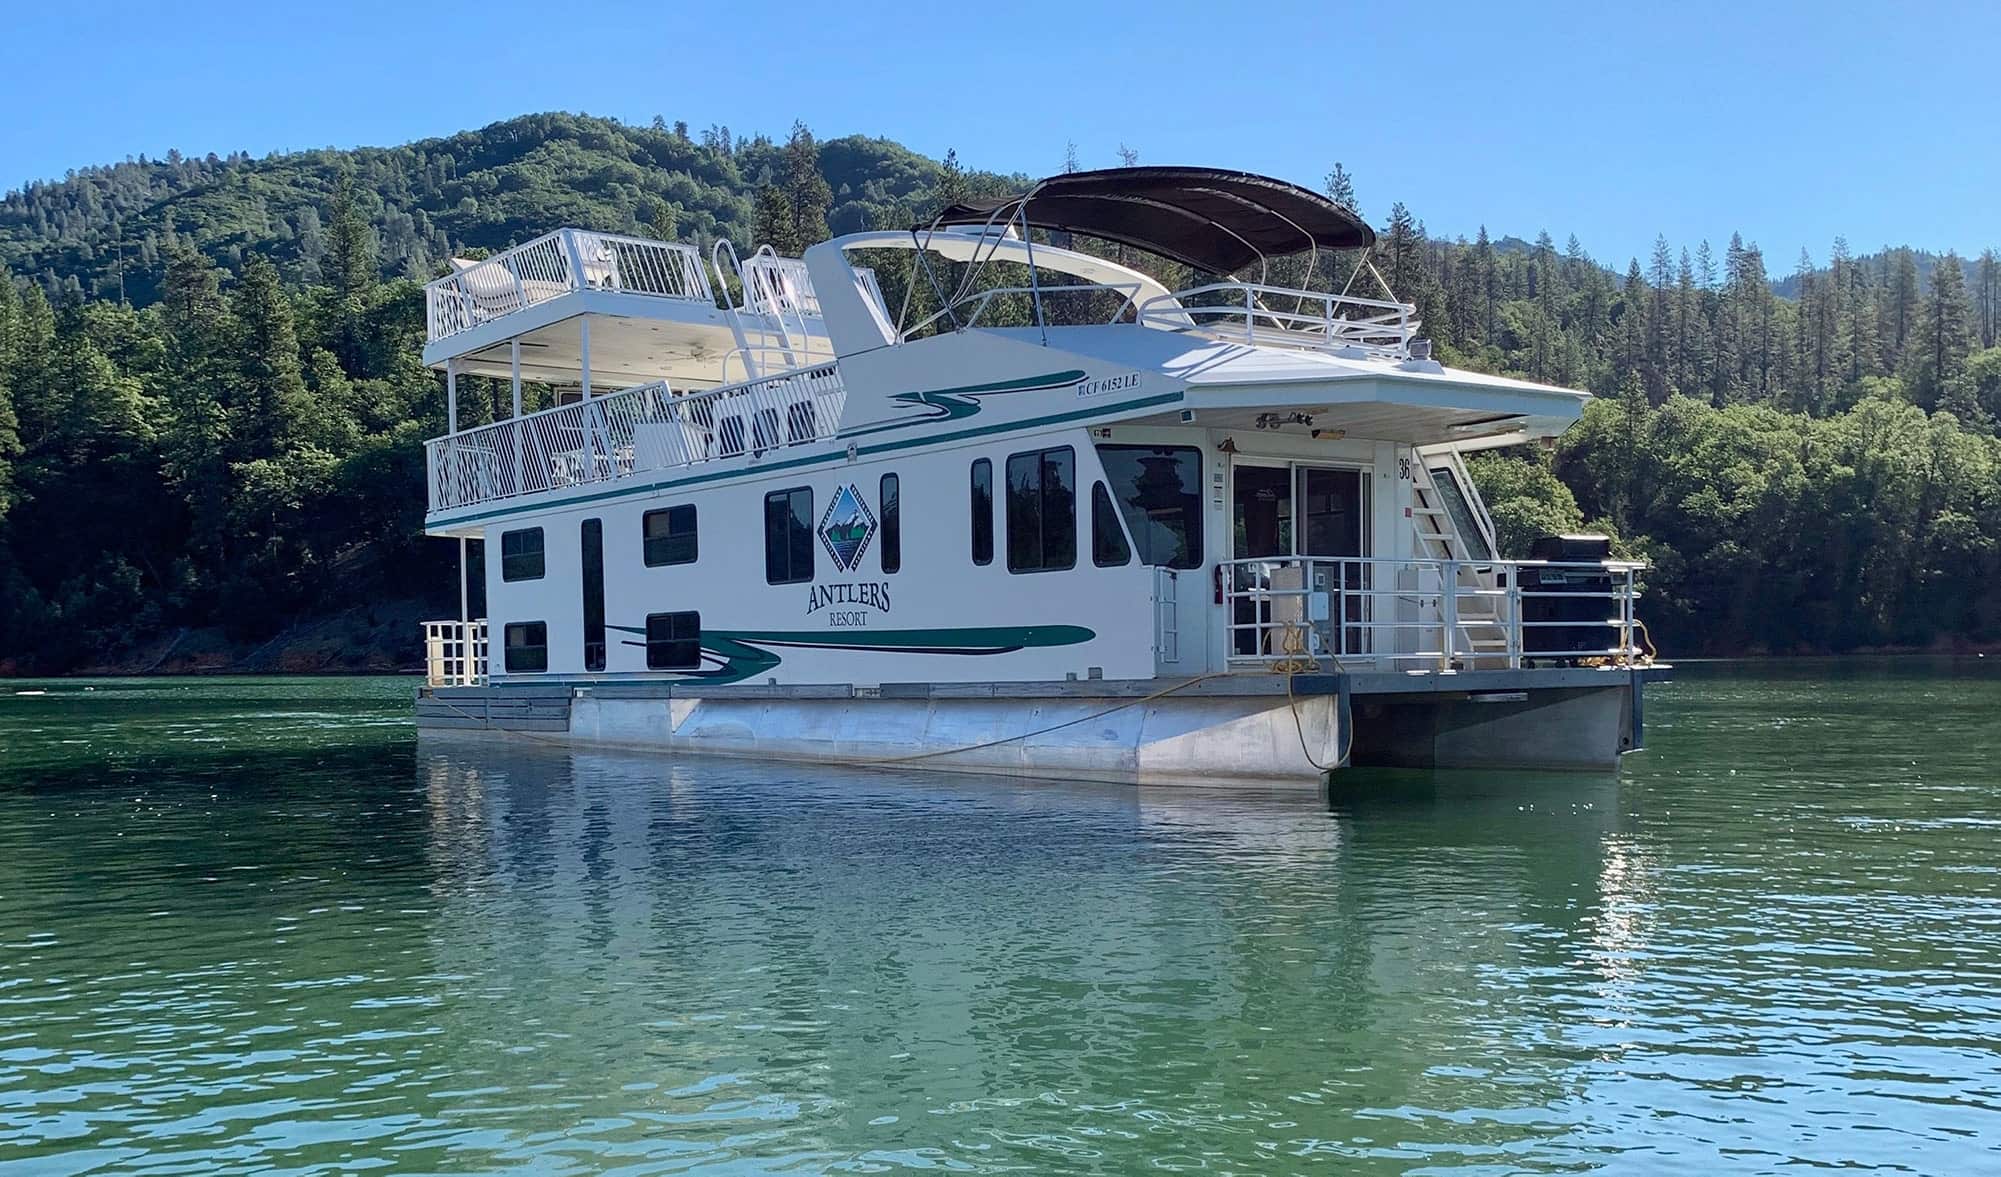 Image of Orion houseboat on lake from the side.